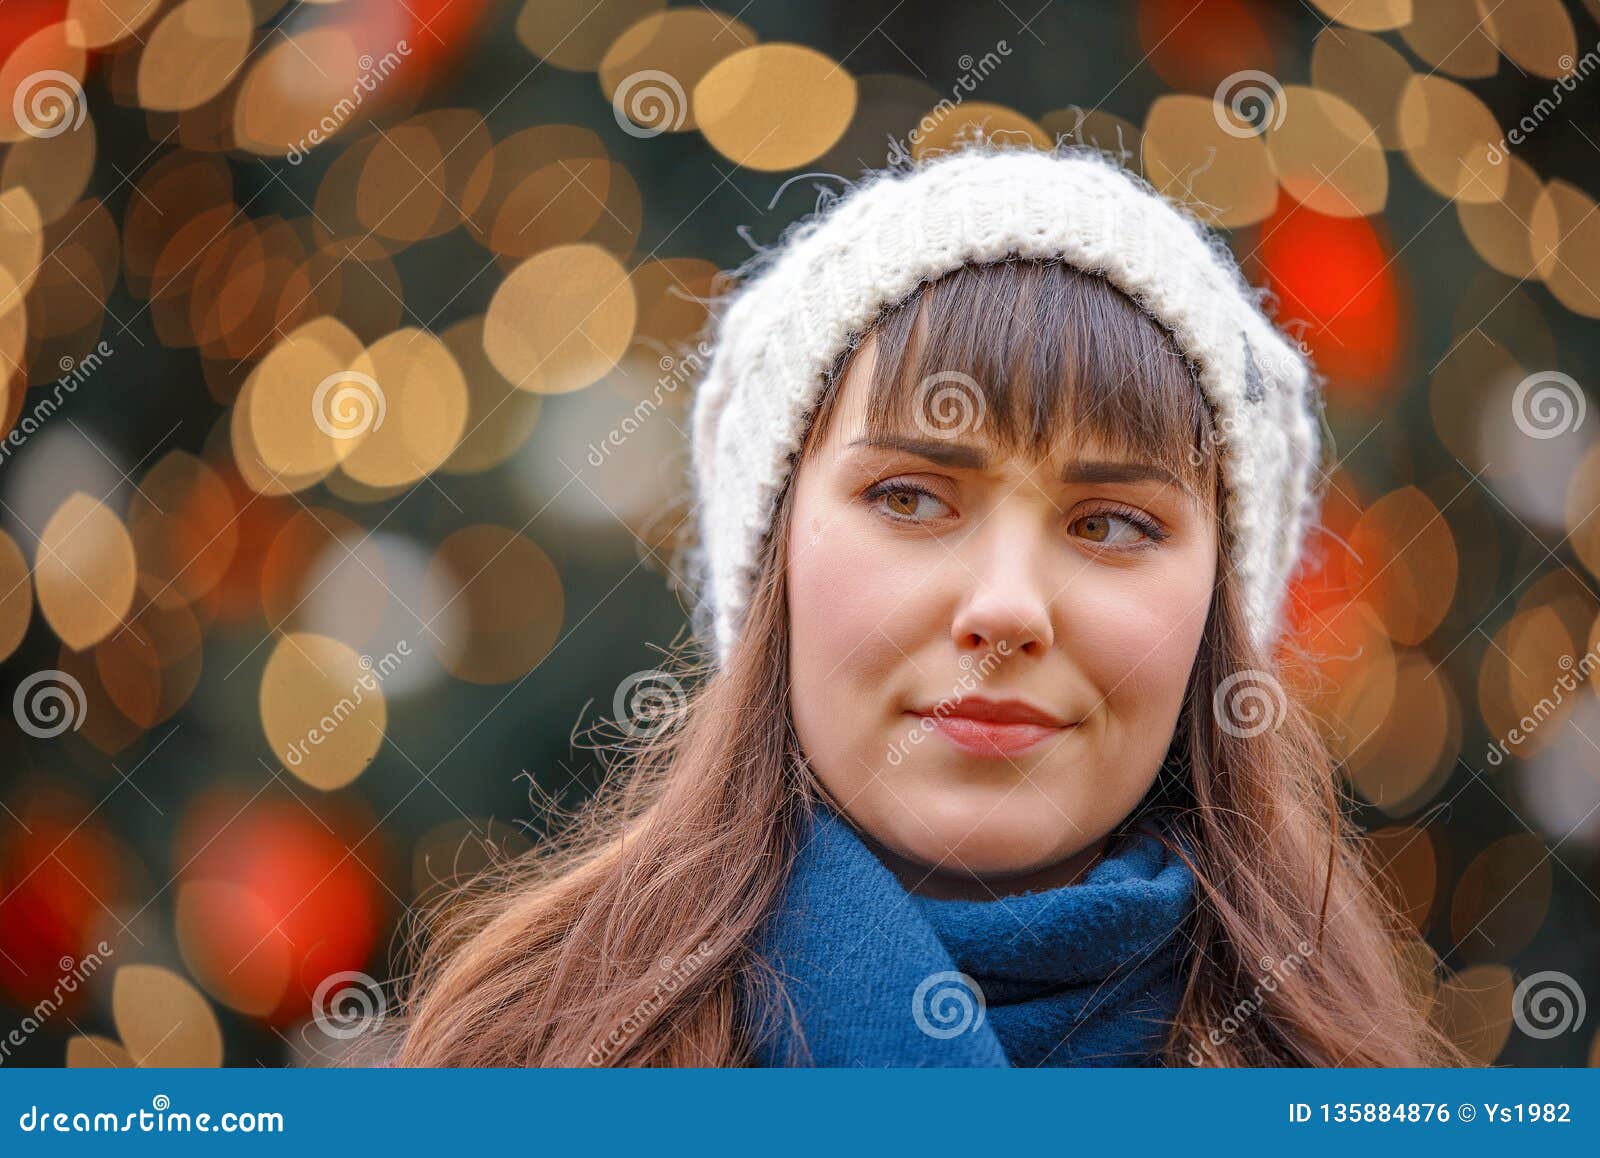 Happy Woman Smiling and Christmas Tree Behind Stock Photo - Image of ...